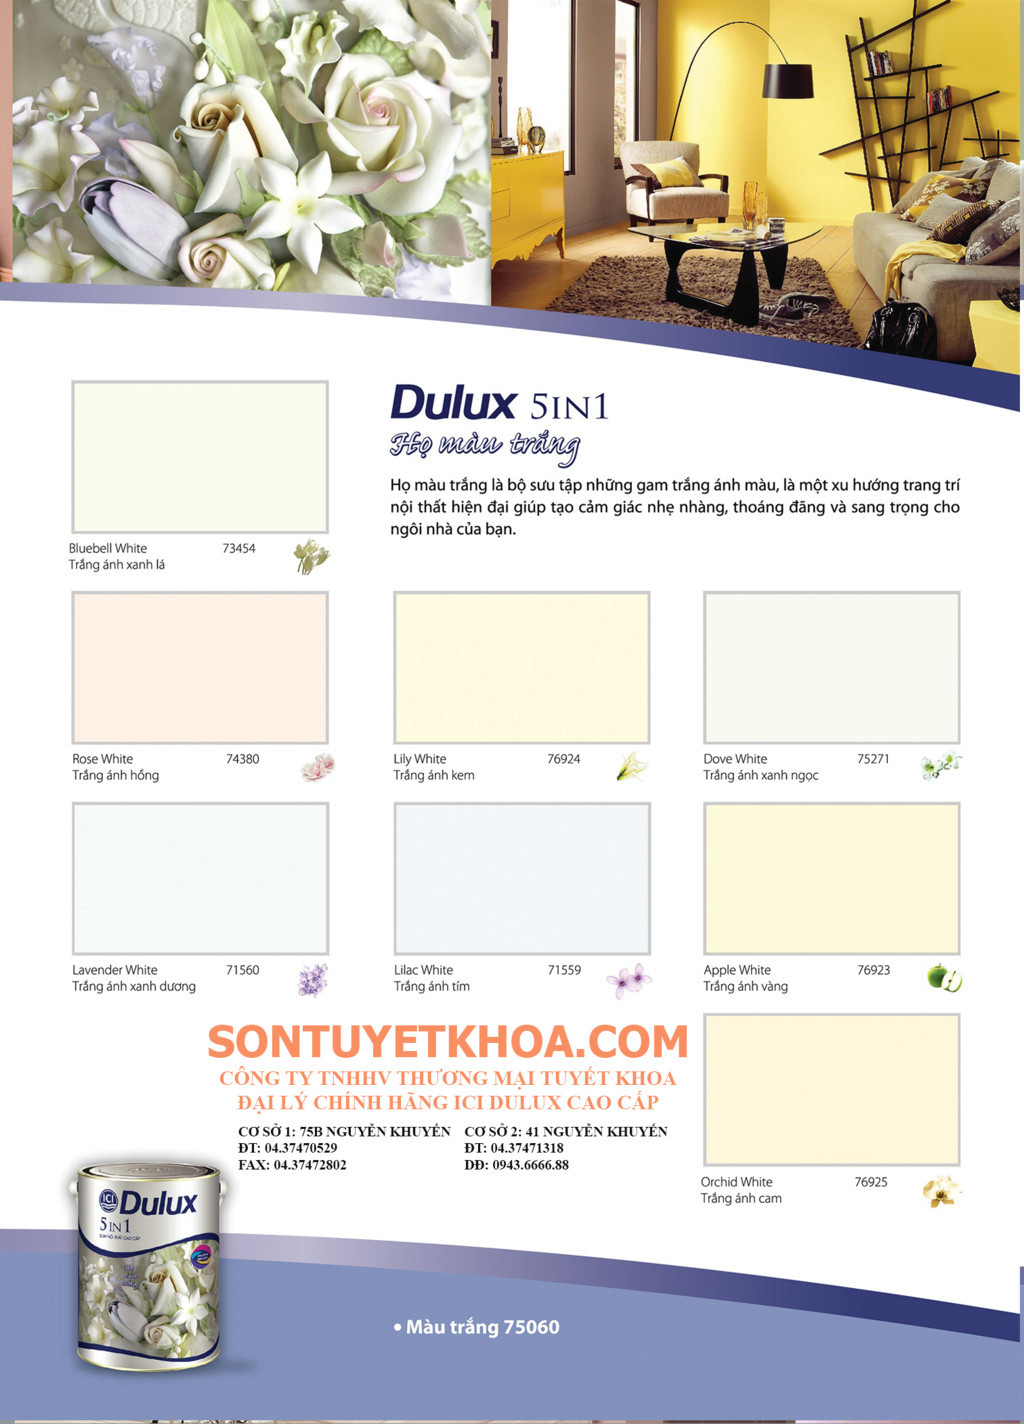 bang-mau-5in1-page3 -son-dulux